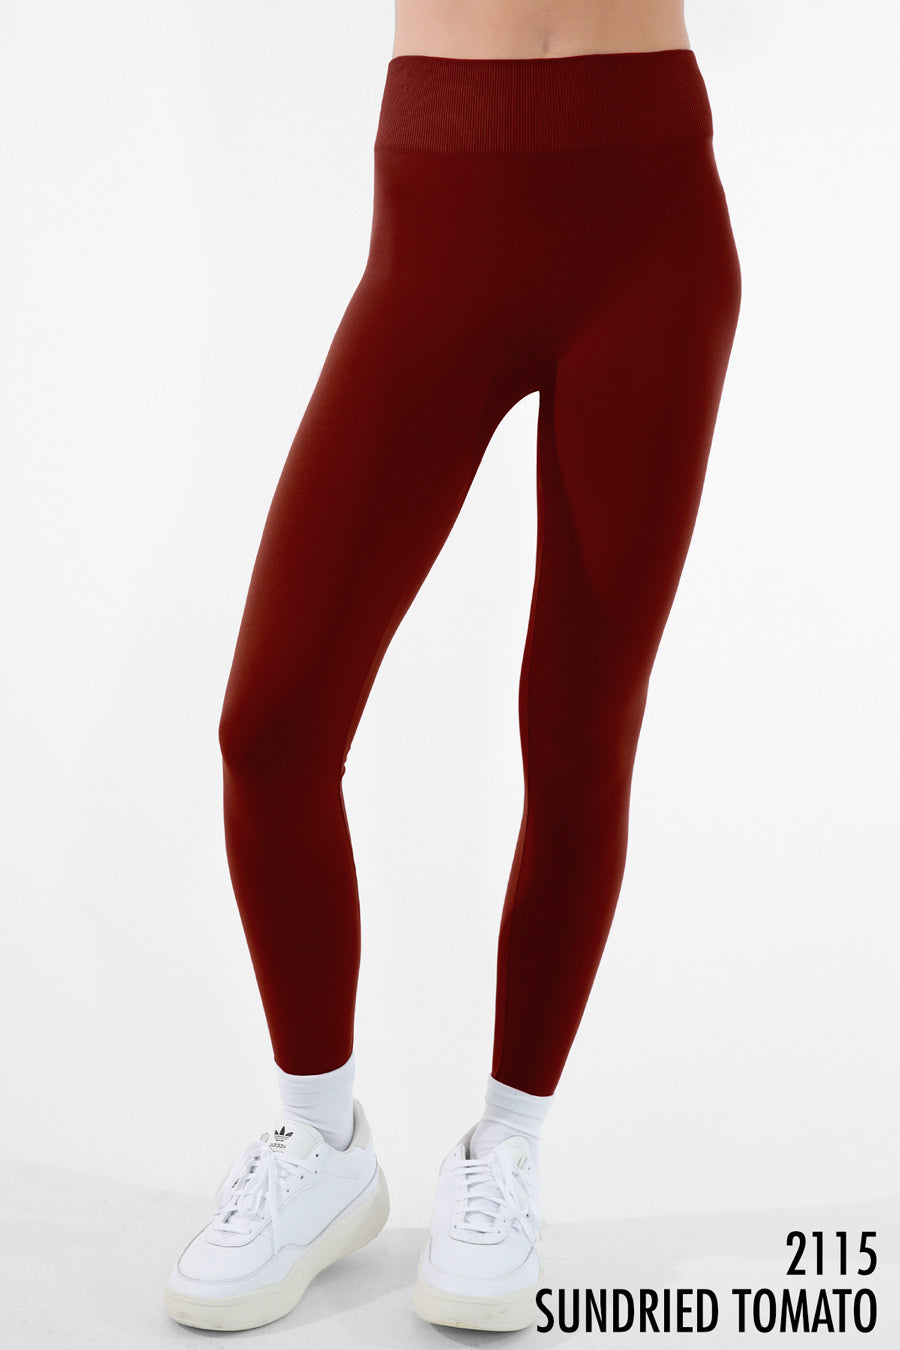 High waisted leggings in the color sun dried tomatoes.